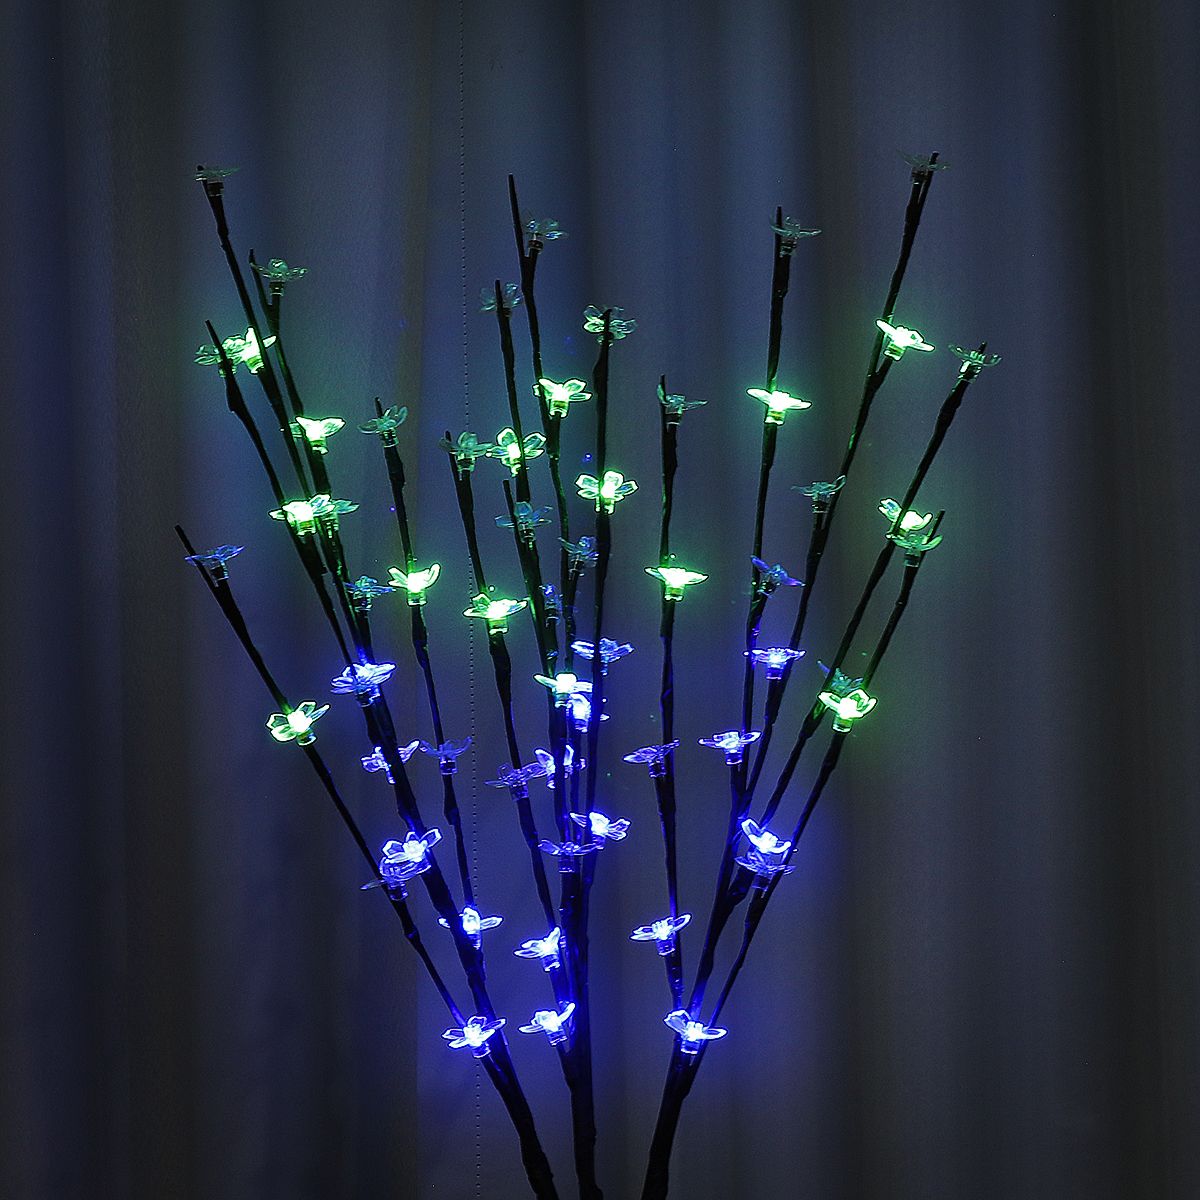 3PCS-Solar-Powered-Warm-White-Colorful-White-LED-Branch-Leaf-Tree-Light-Outdoor-Garden-Path-Patio-Bo-1564878